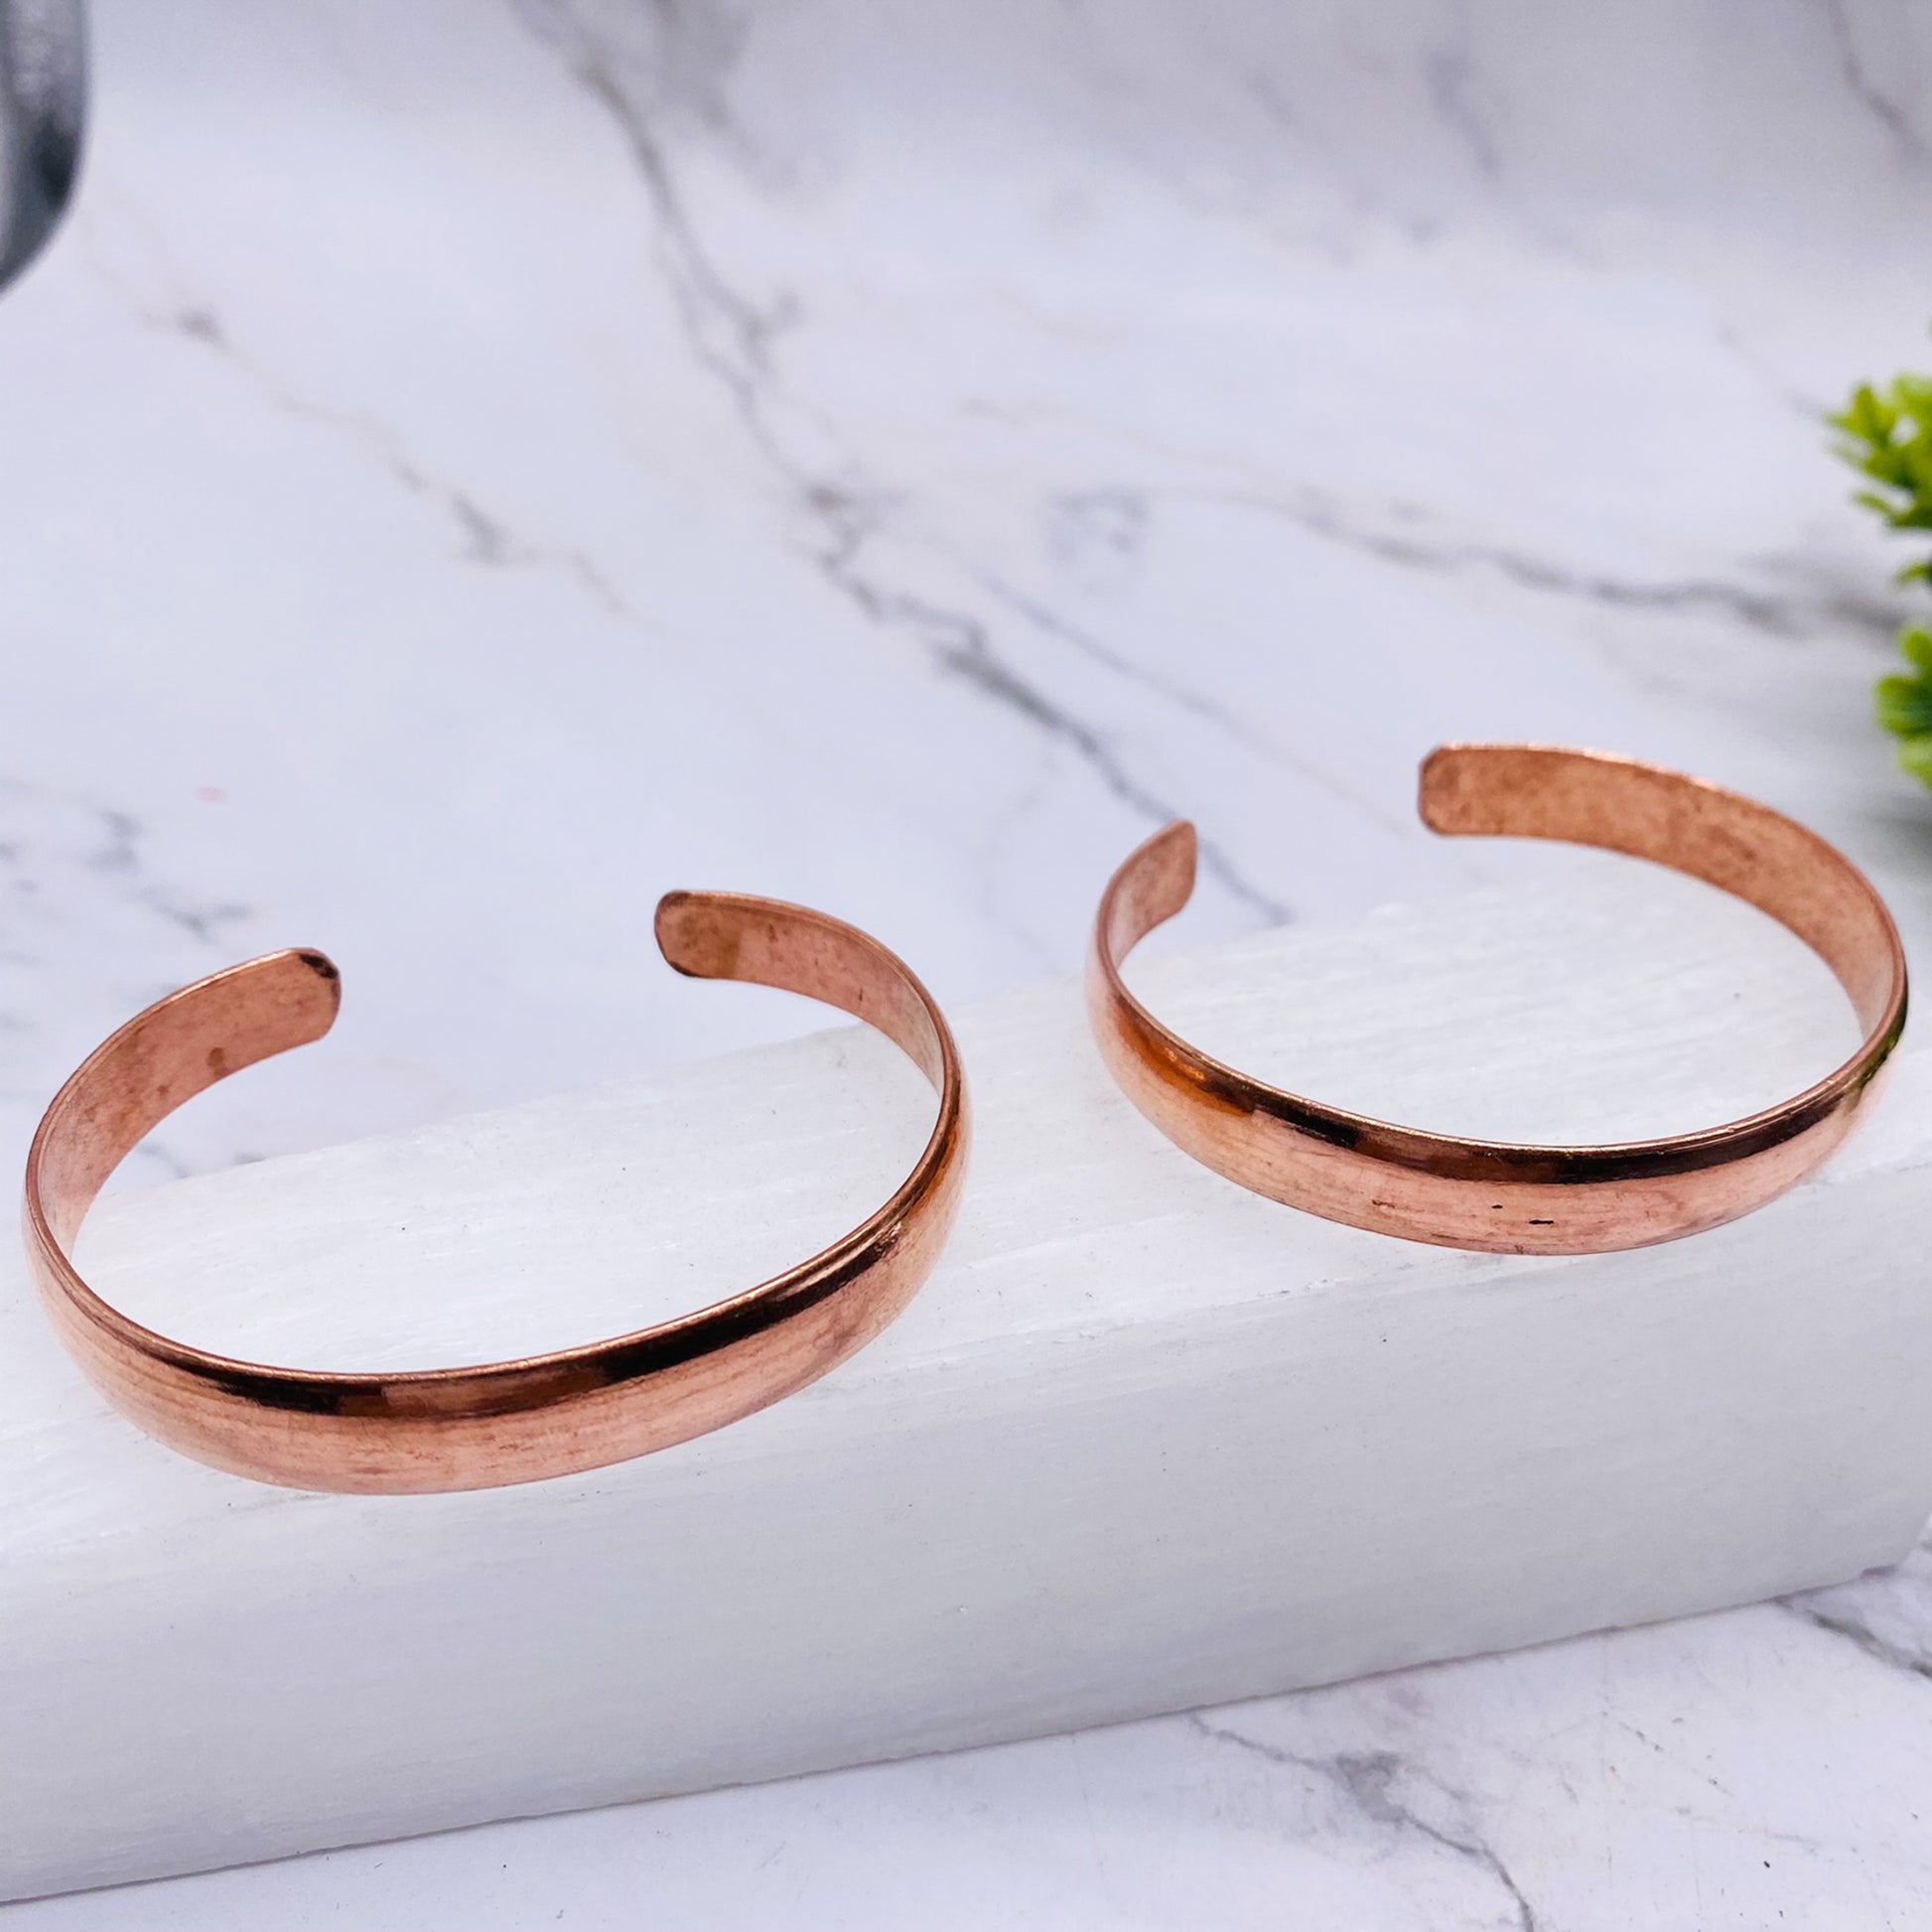 Buy Pure Round Copper Bracelet for best price at magizhcopper.com